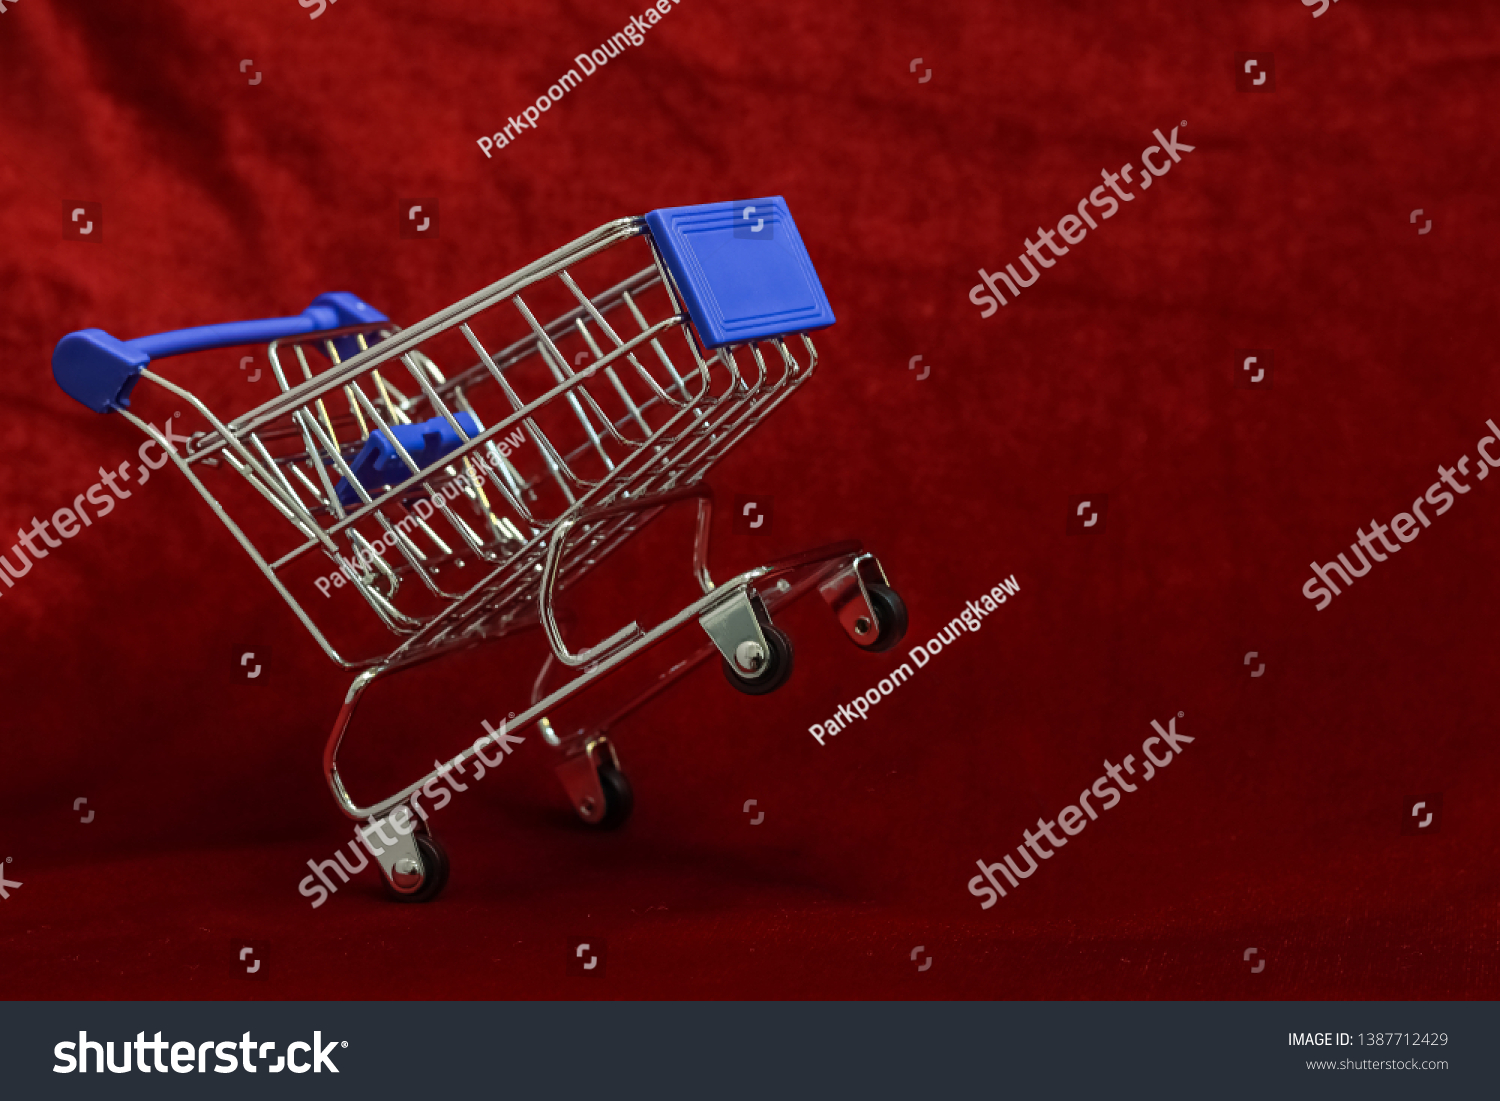 online shopping or internet shop concepts, with shopping cart symbol. #1387712429